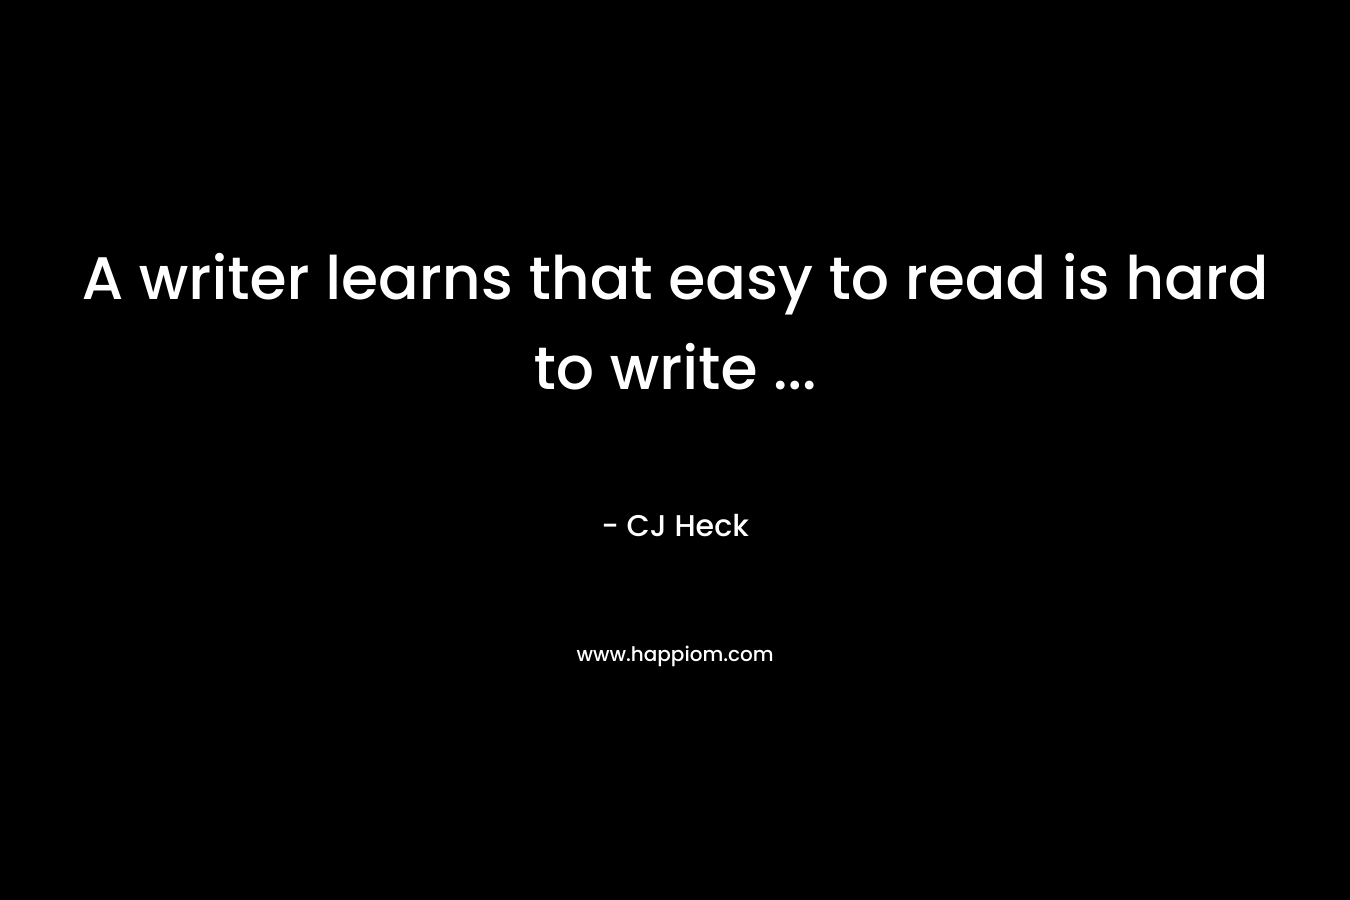 A writer learns that easy to read is hard to write ...